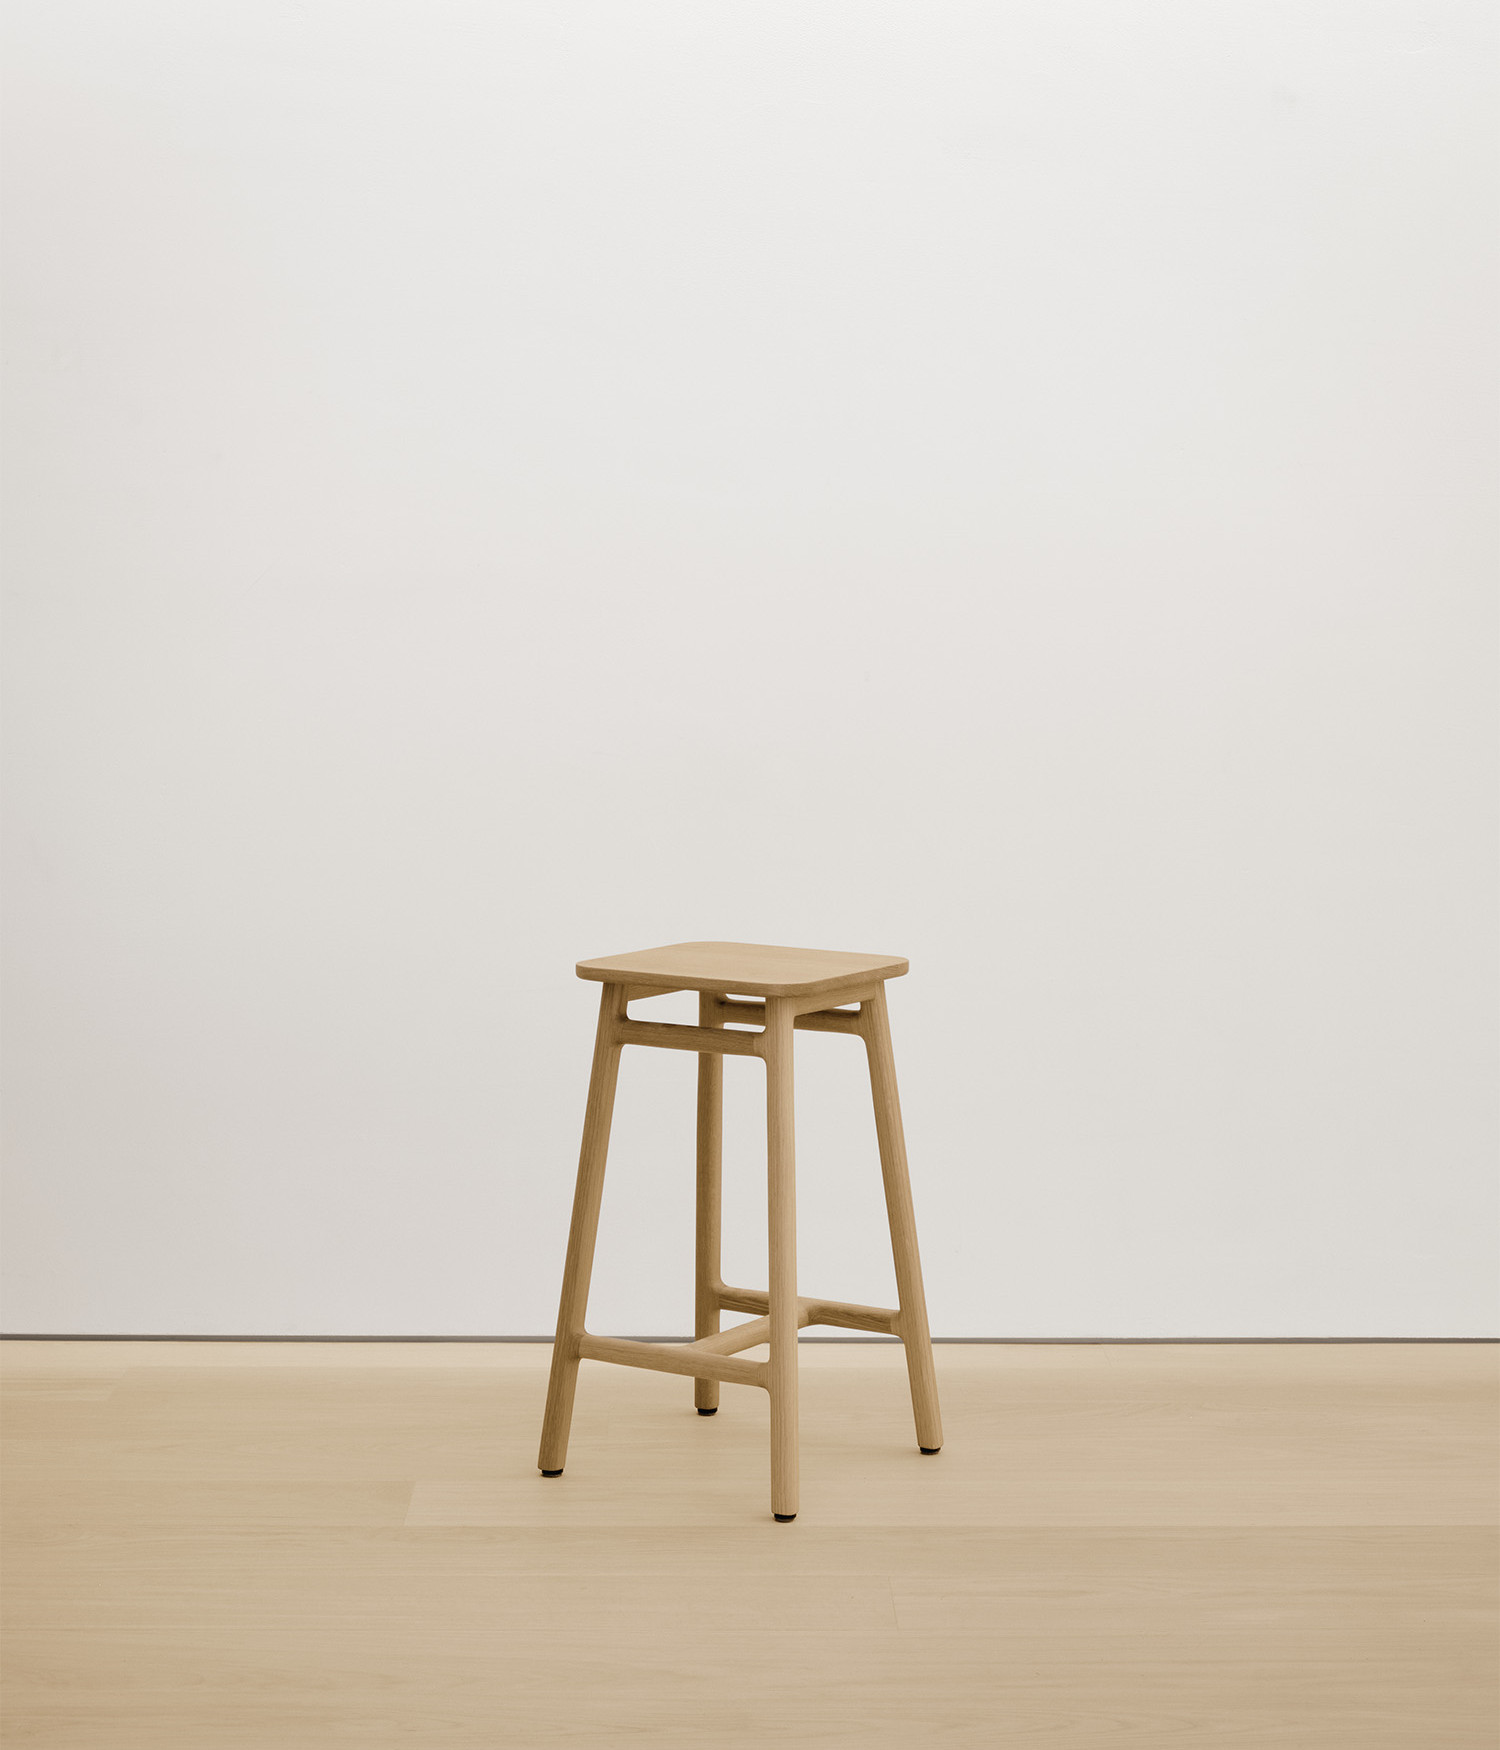  white-oak stool with solid wood seat